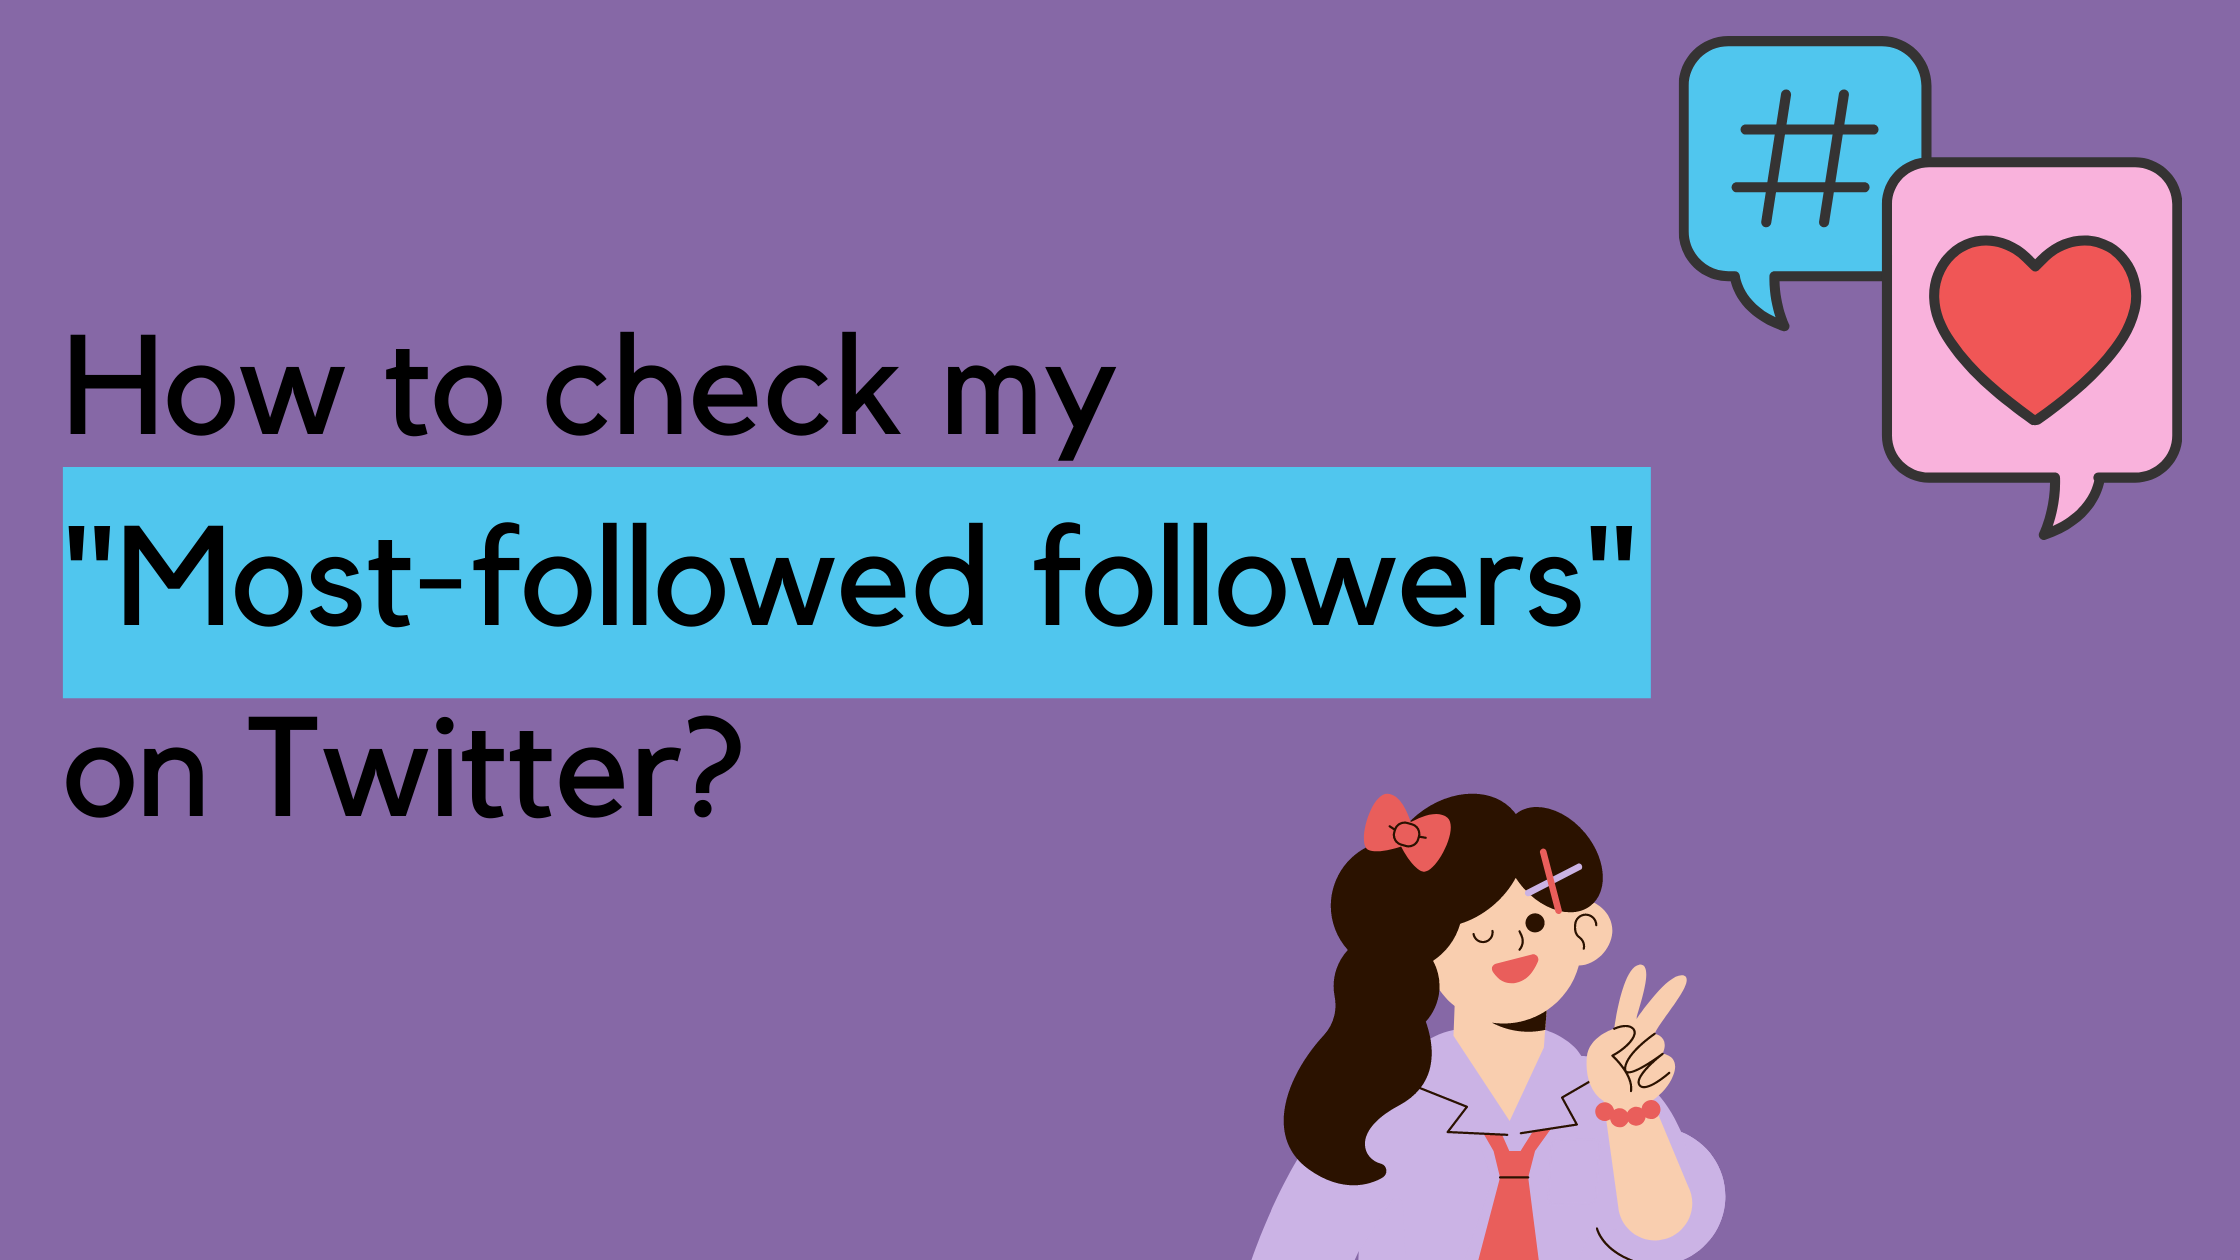 How to check my most-followed followers on Twitter?